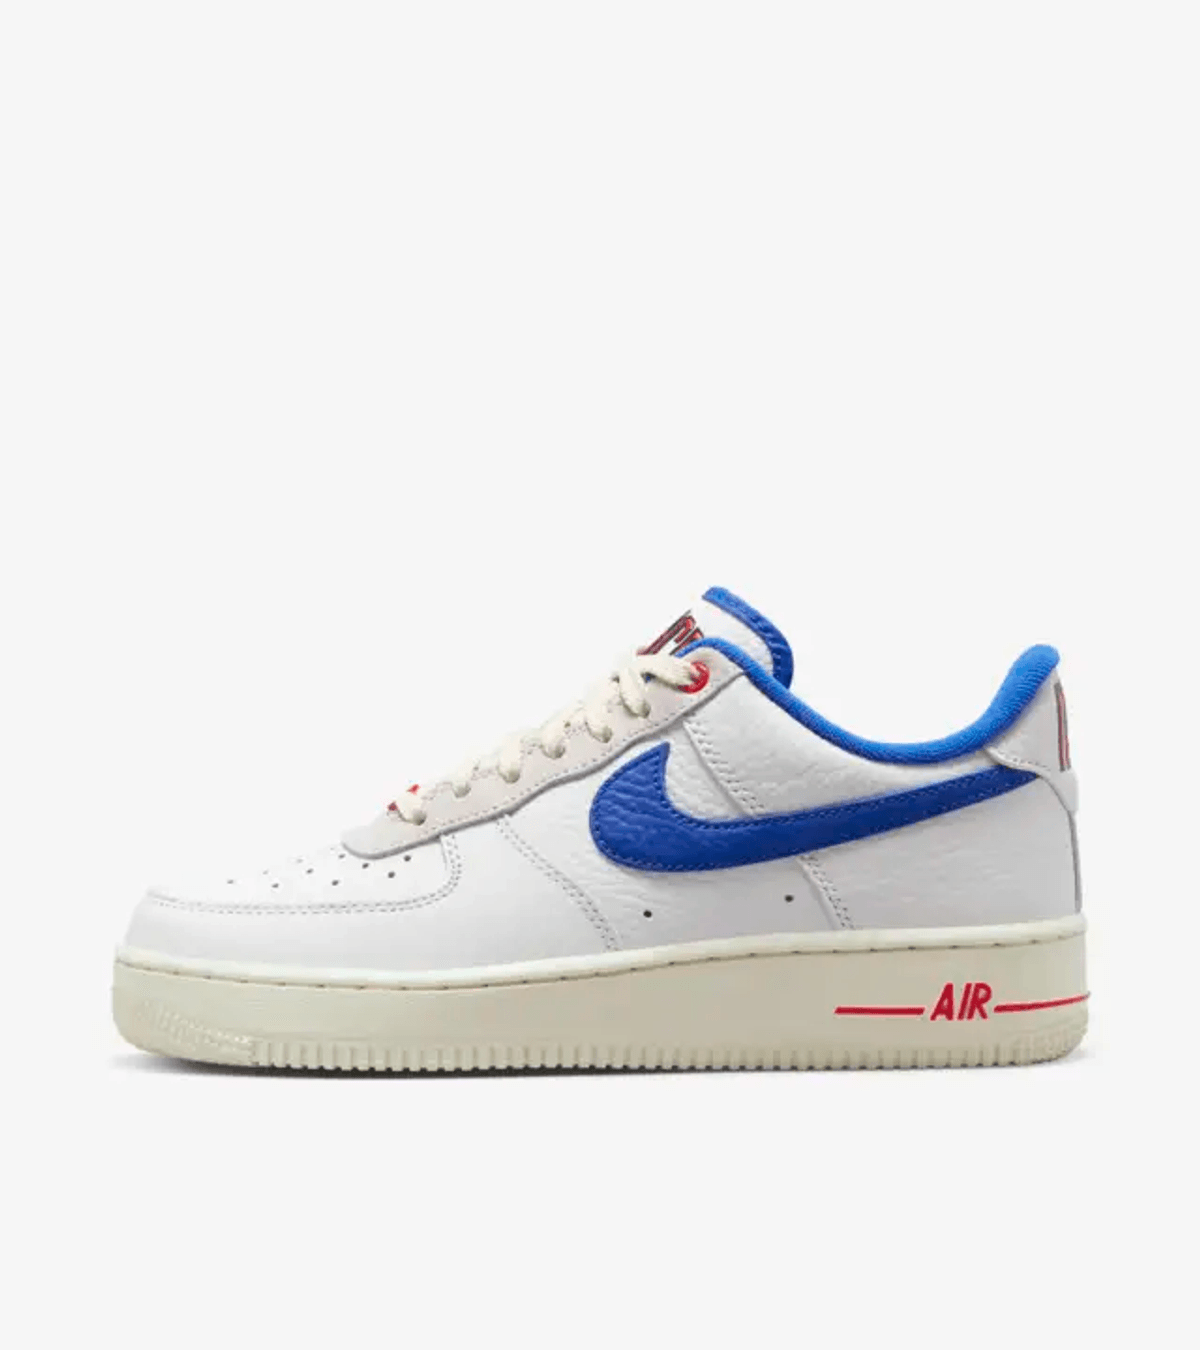 Nike Air Force 1 '07 University Blue and Summit White (W)